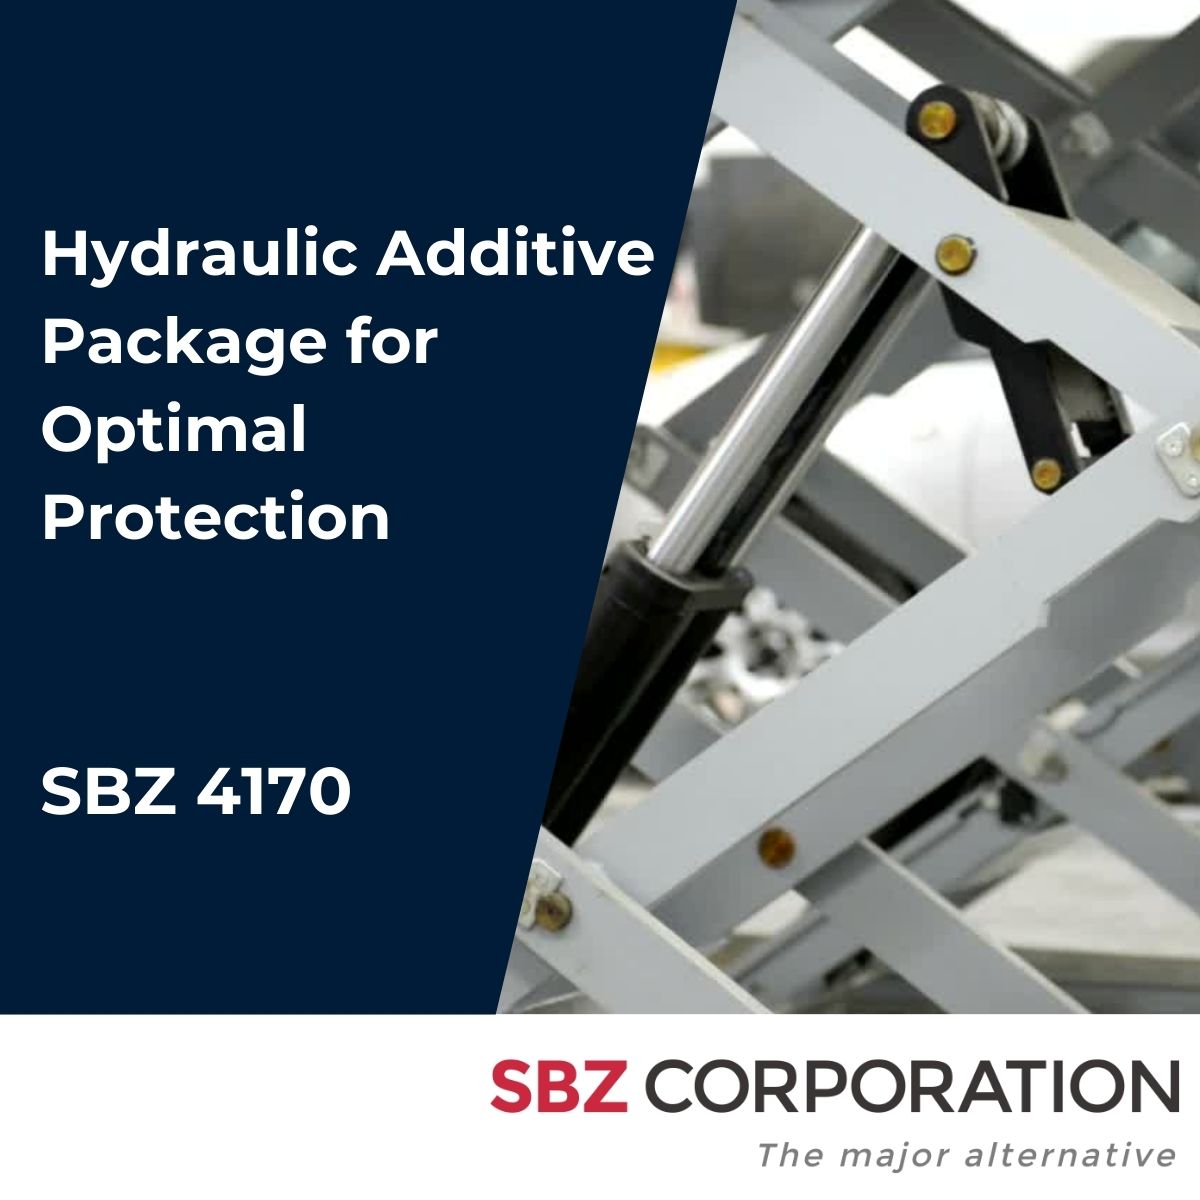 Hydraulic Additive Package for Optimal Protection